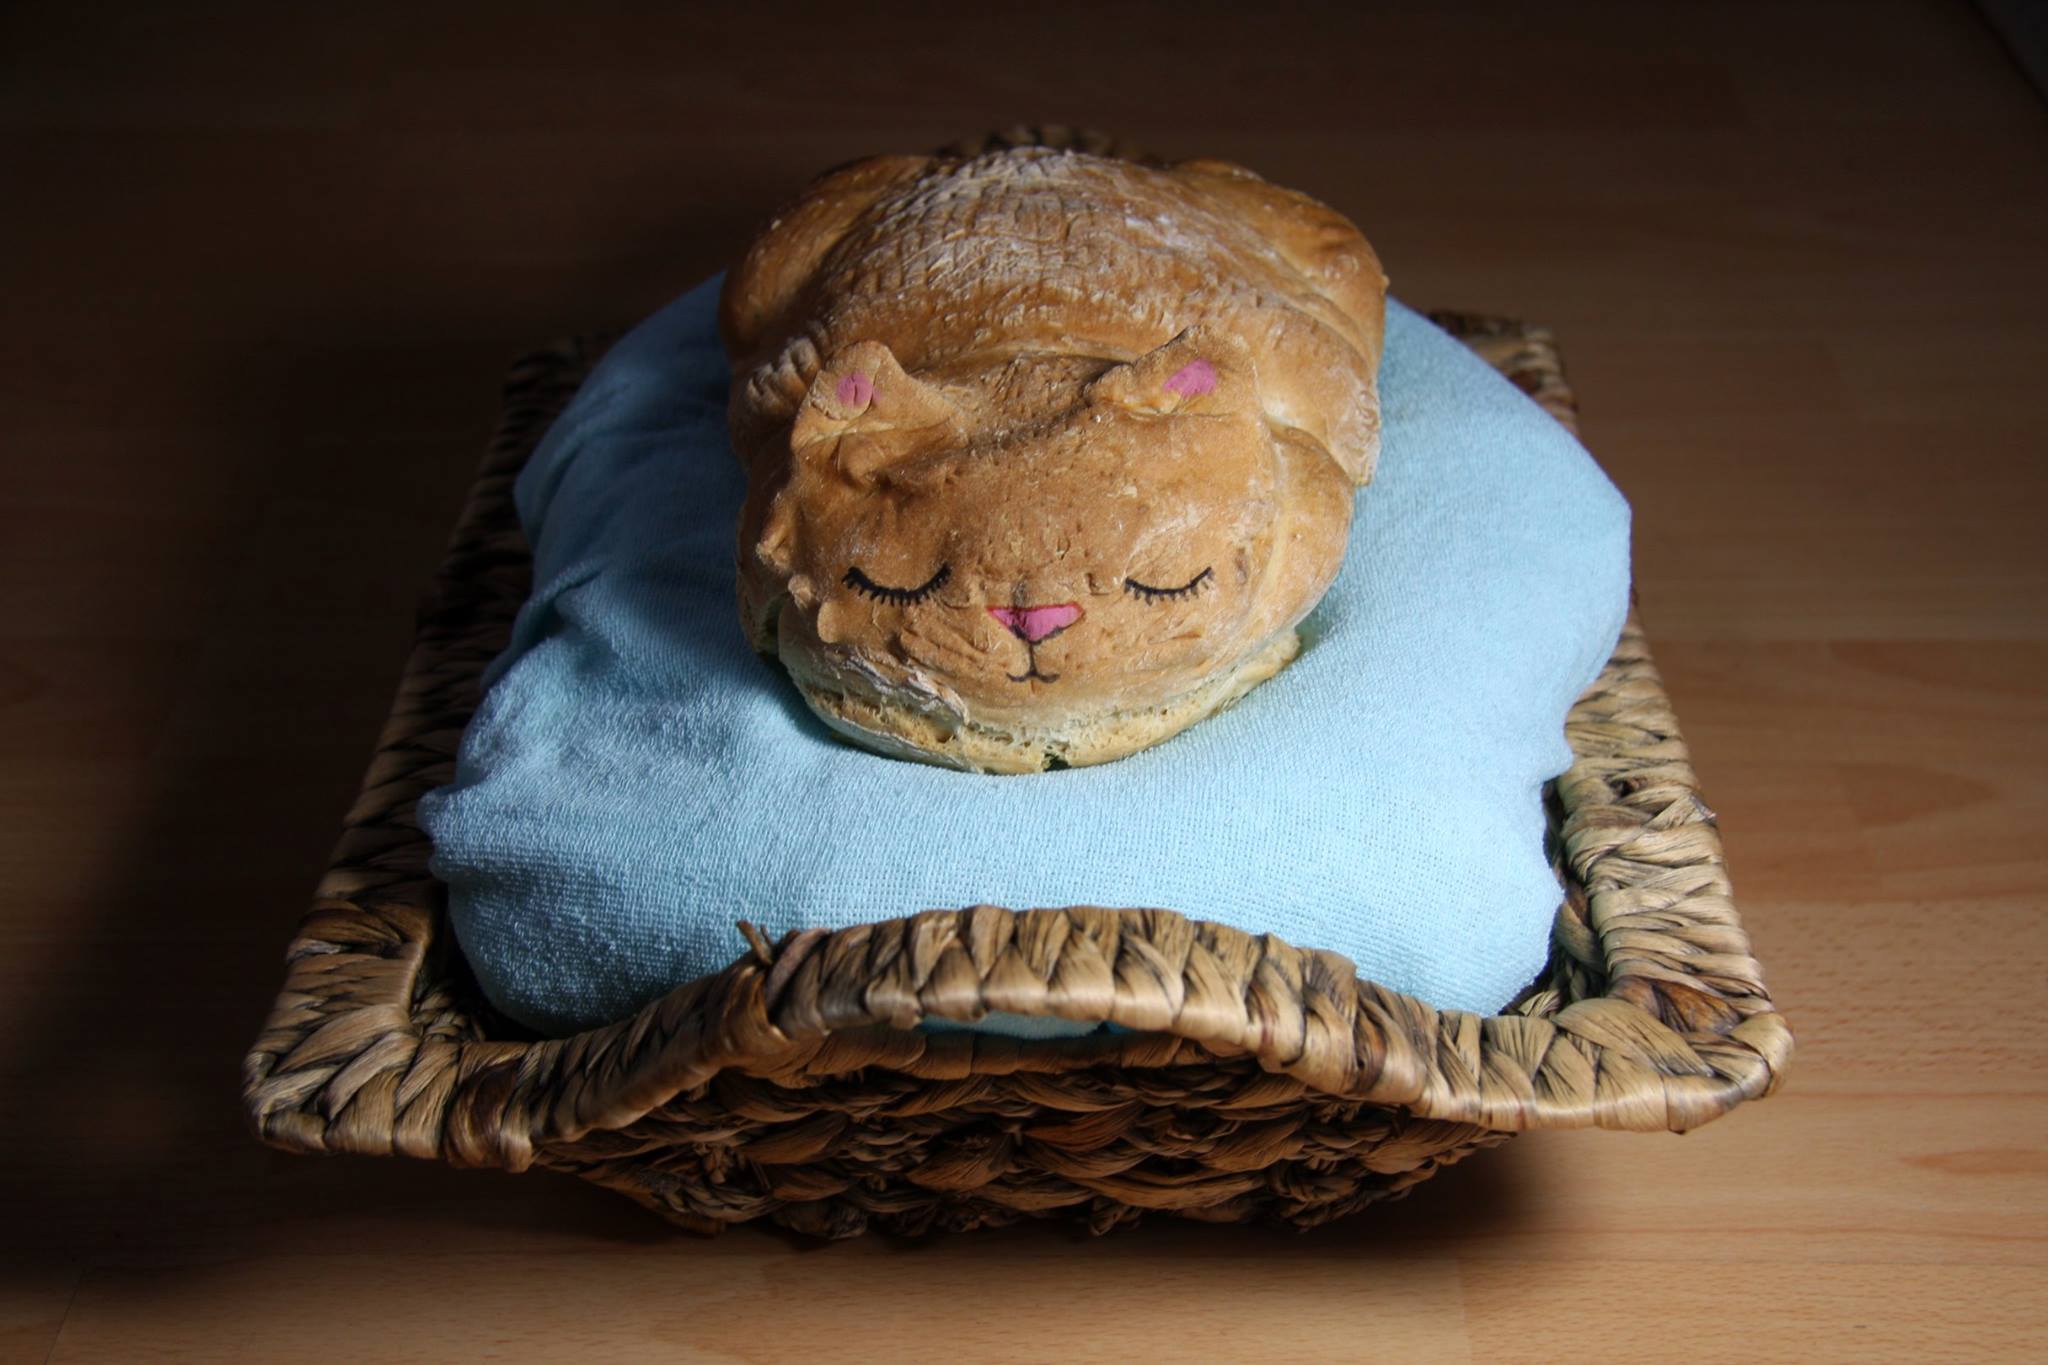 PHOTO: The final product is an adorable edible loaf of bread shaped like a cat, or as it's commonly being called, a catloaf.